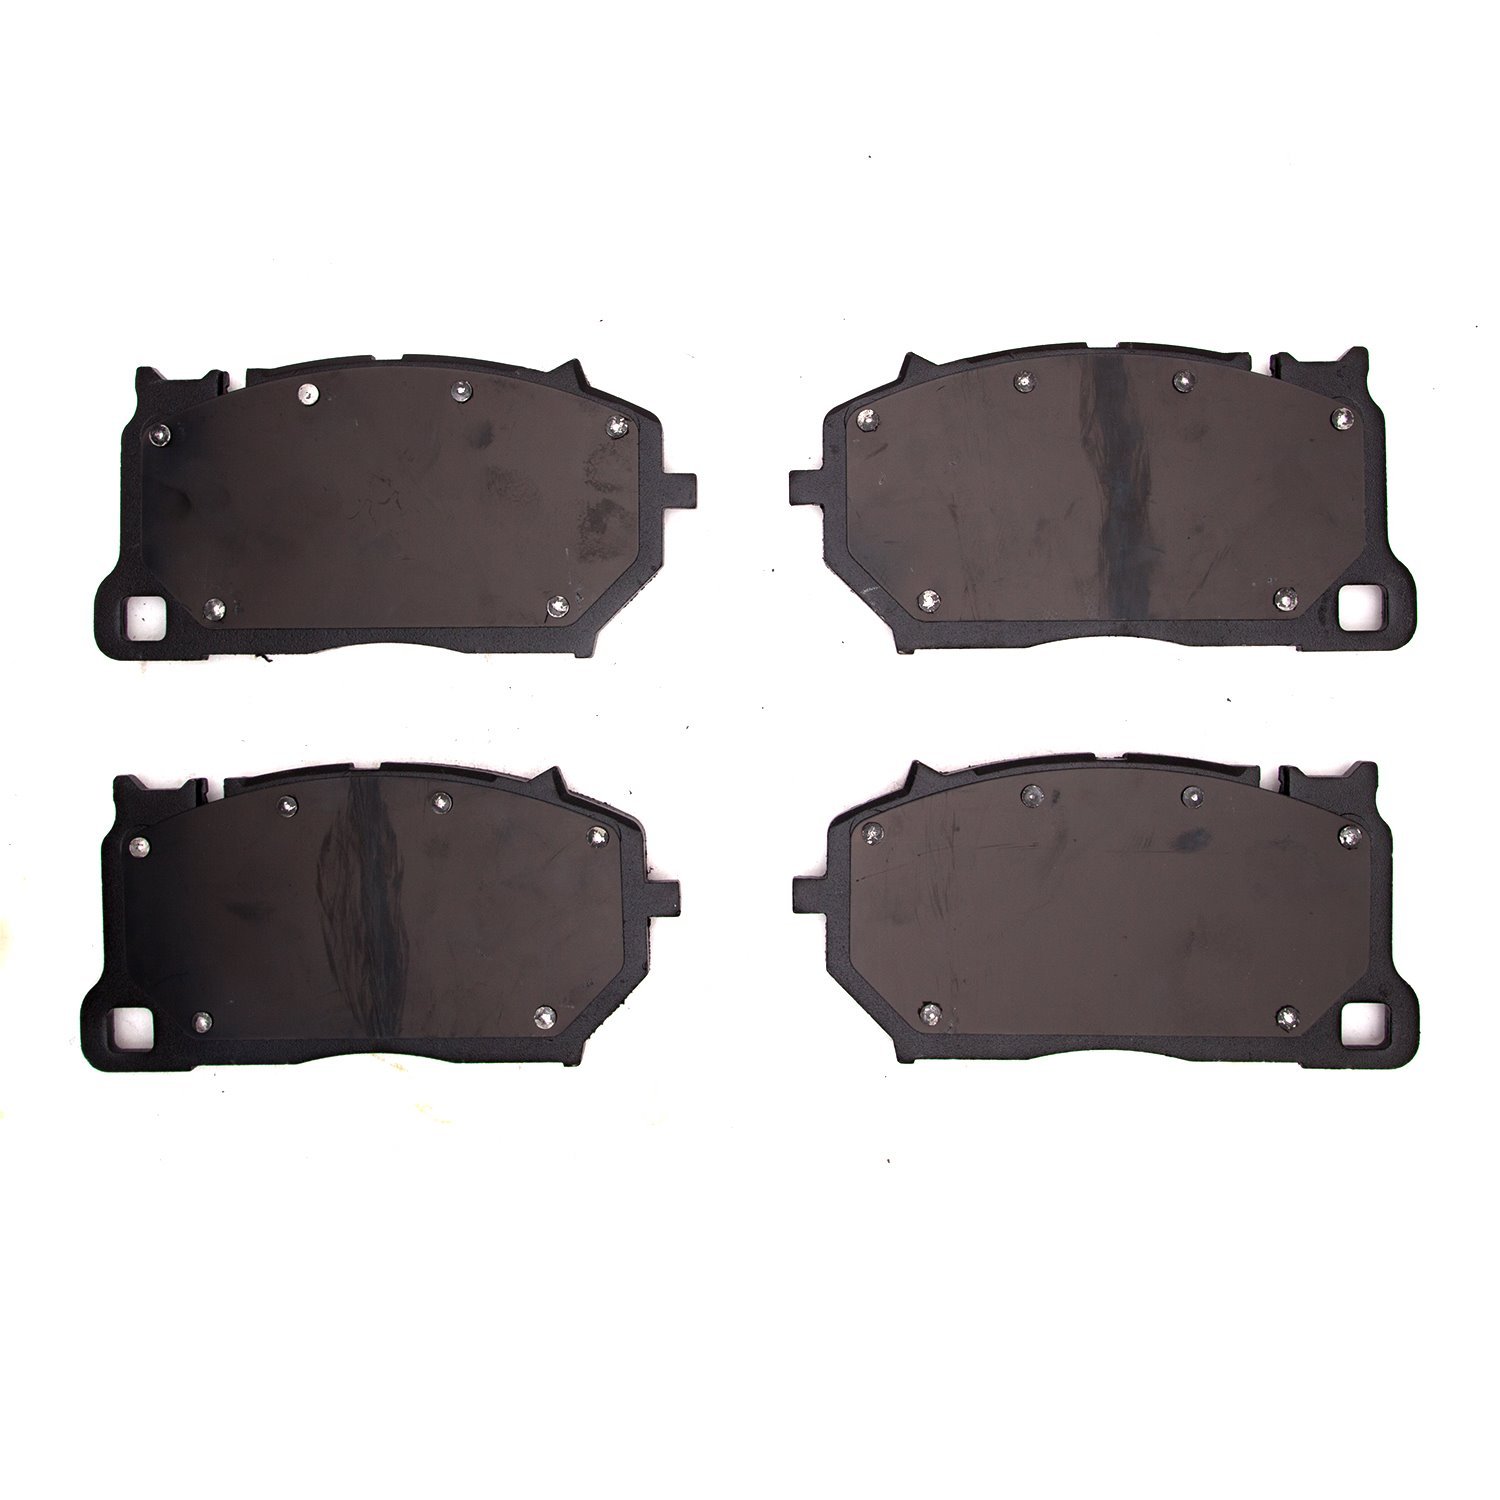 1311-1899-00 3000-Series Semi-Metallic Brake Pads, Fits Select Multiple Makes/Models, Position: Front